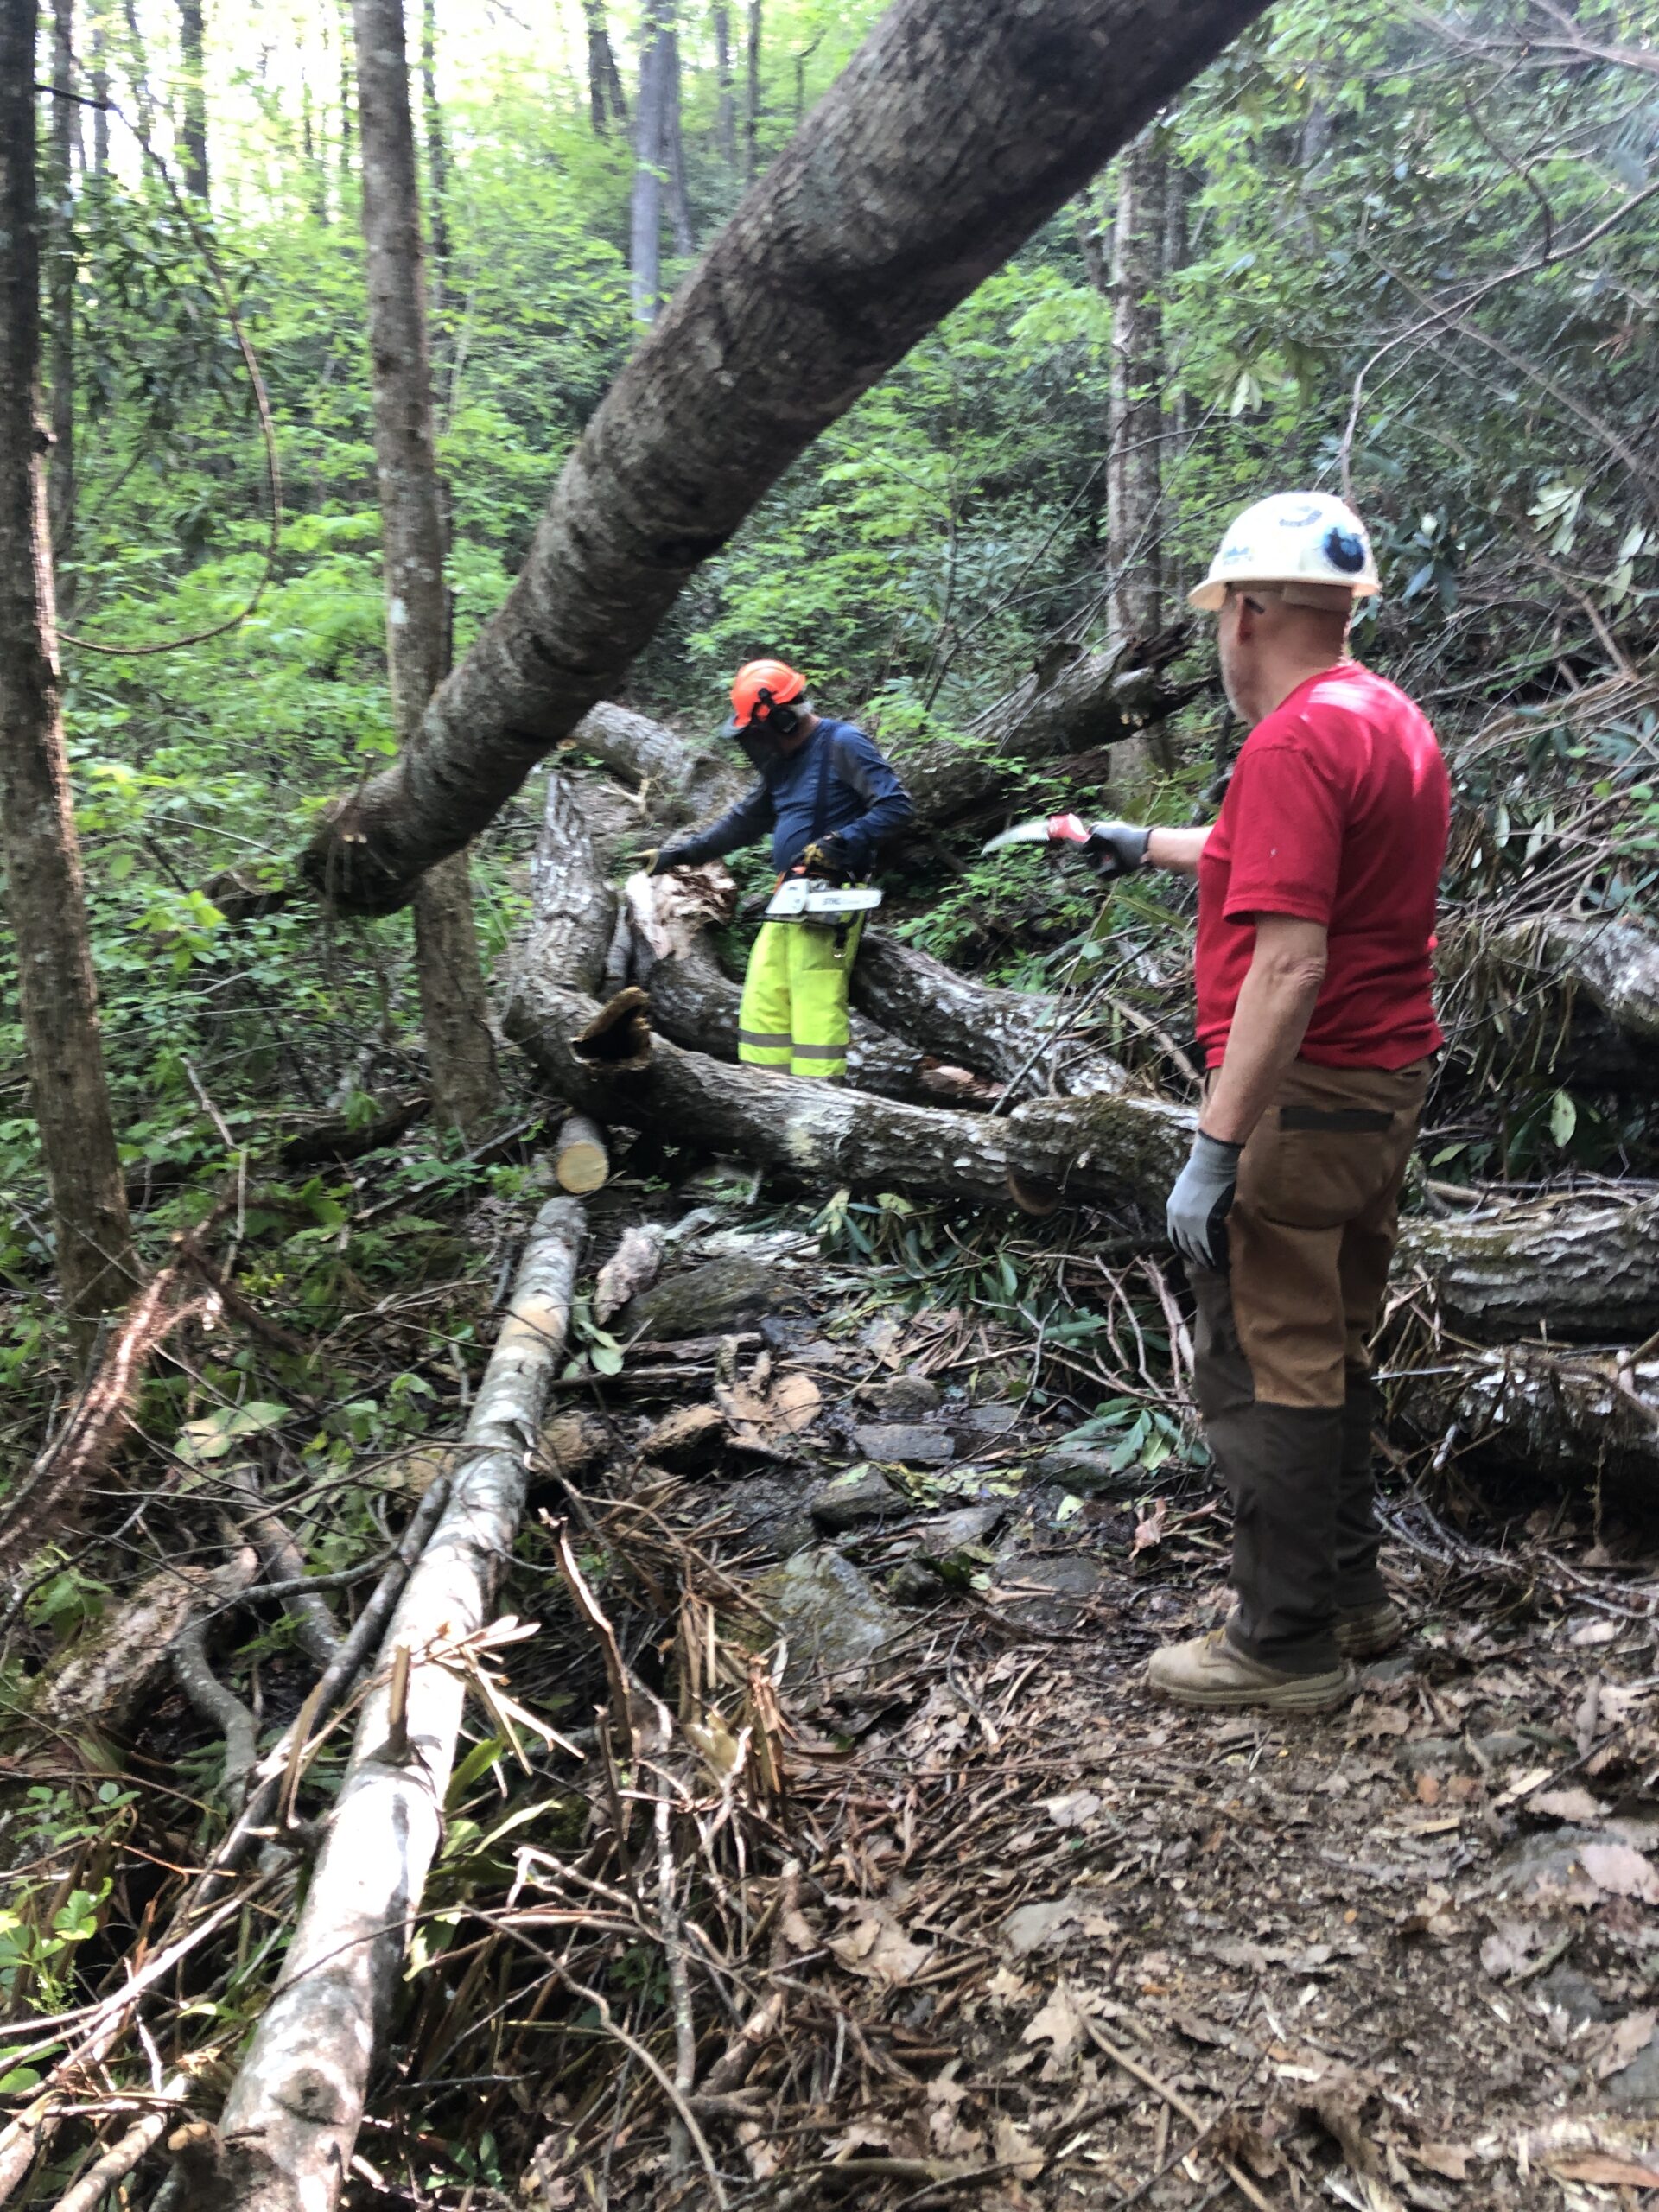 Ross and David working on a blowdown during a volunteer workday